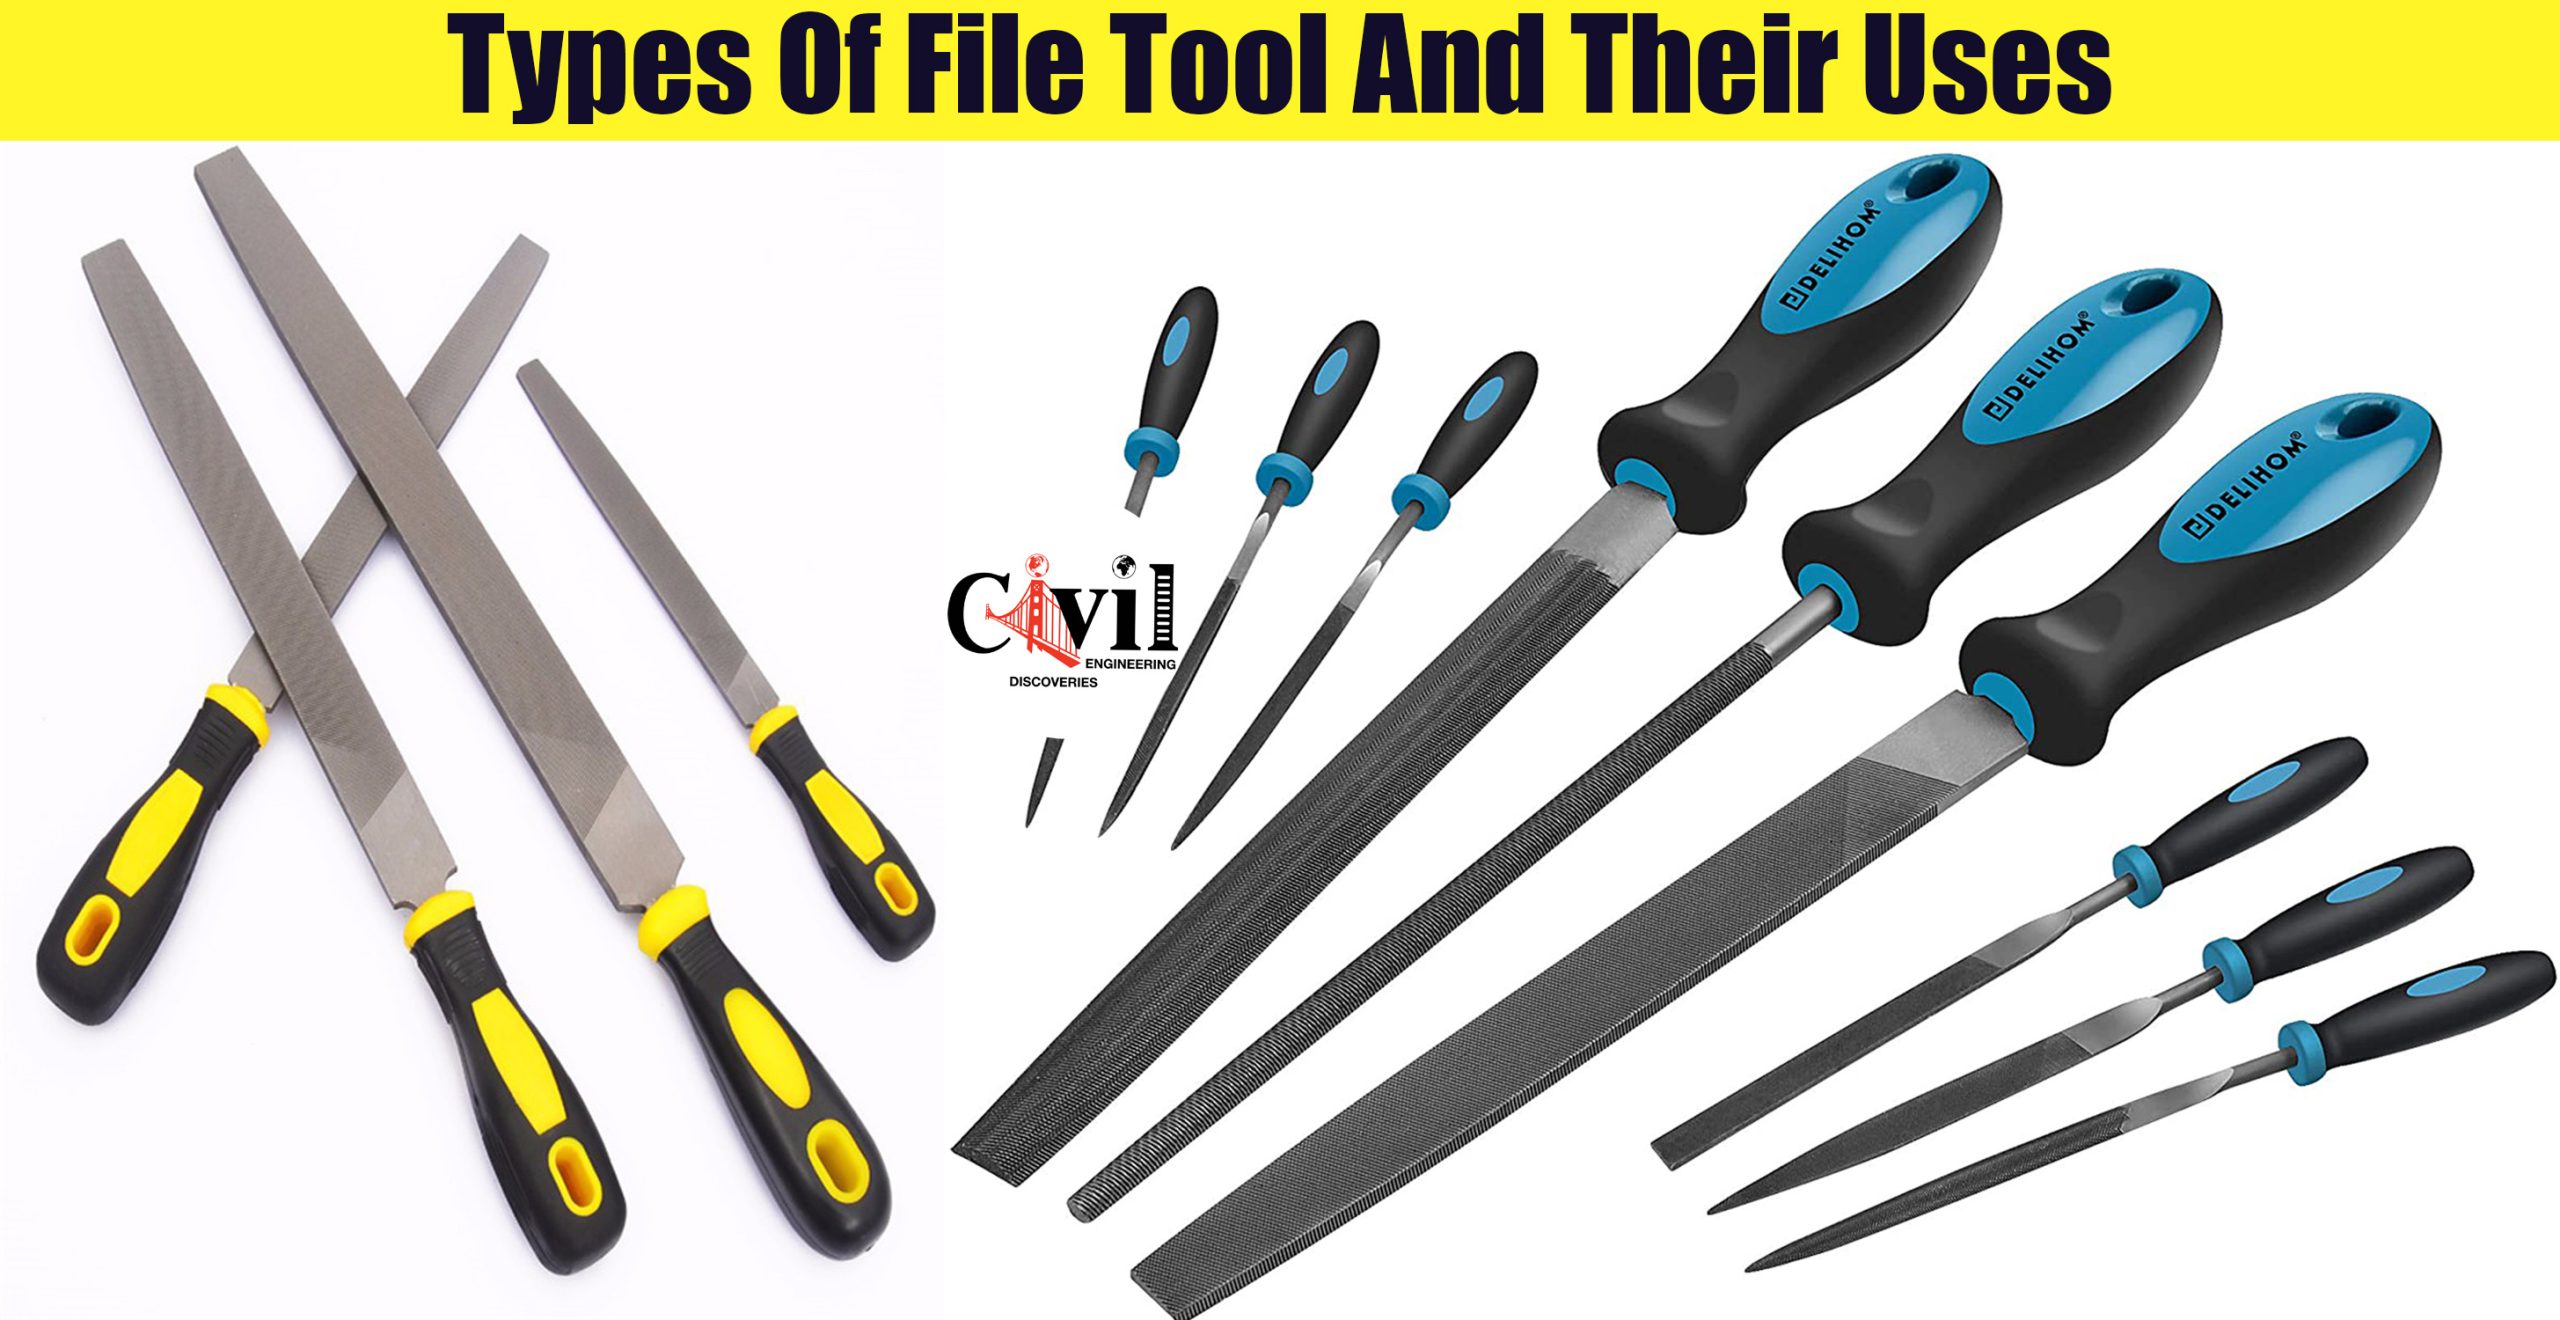 7 Types of Metal Cutting Tools and Their Uses